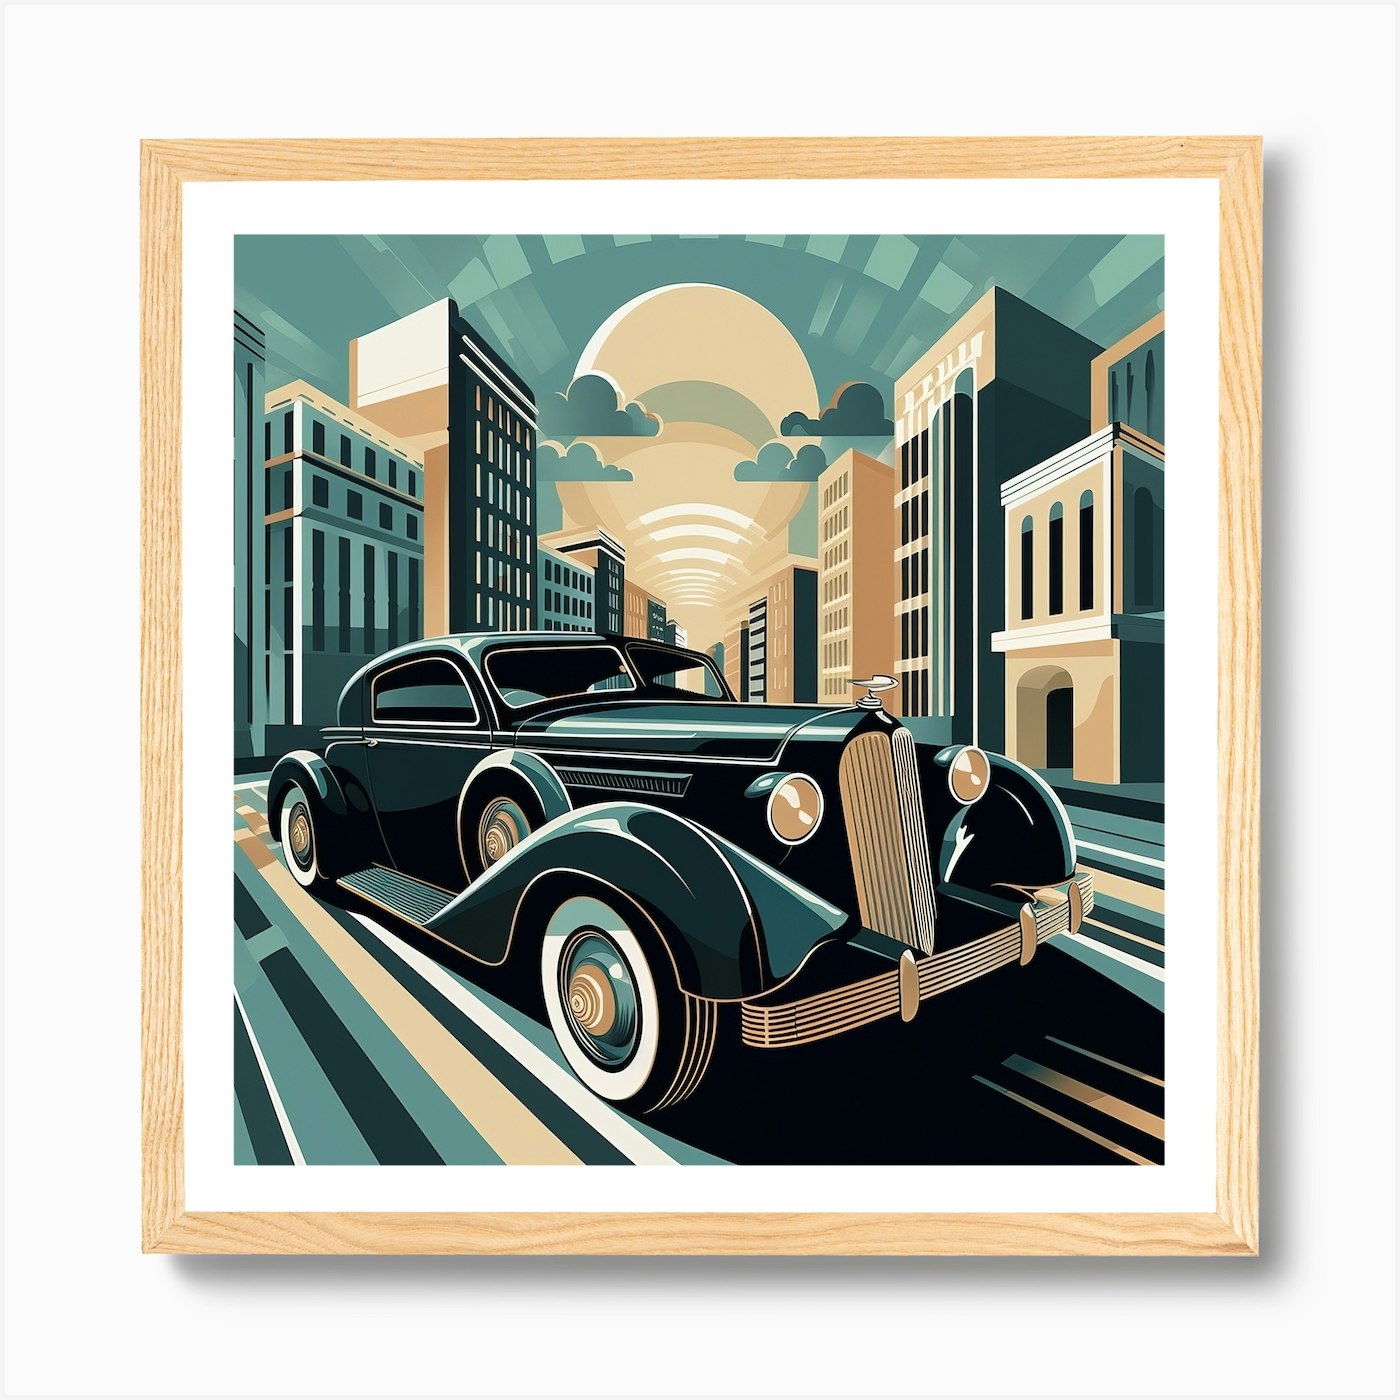 Art Deco updates: A classic look reimagined by Adobe Stock